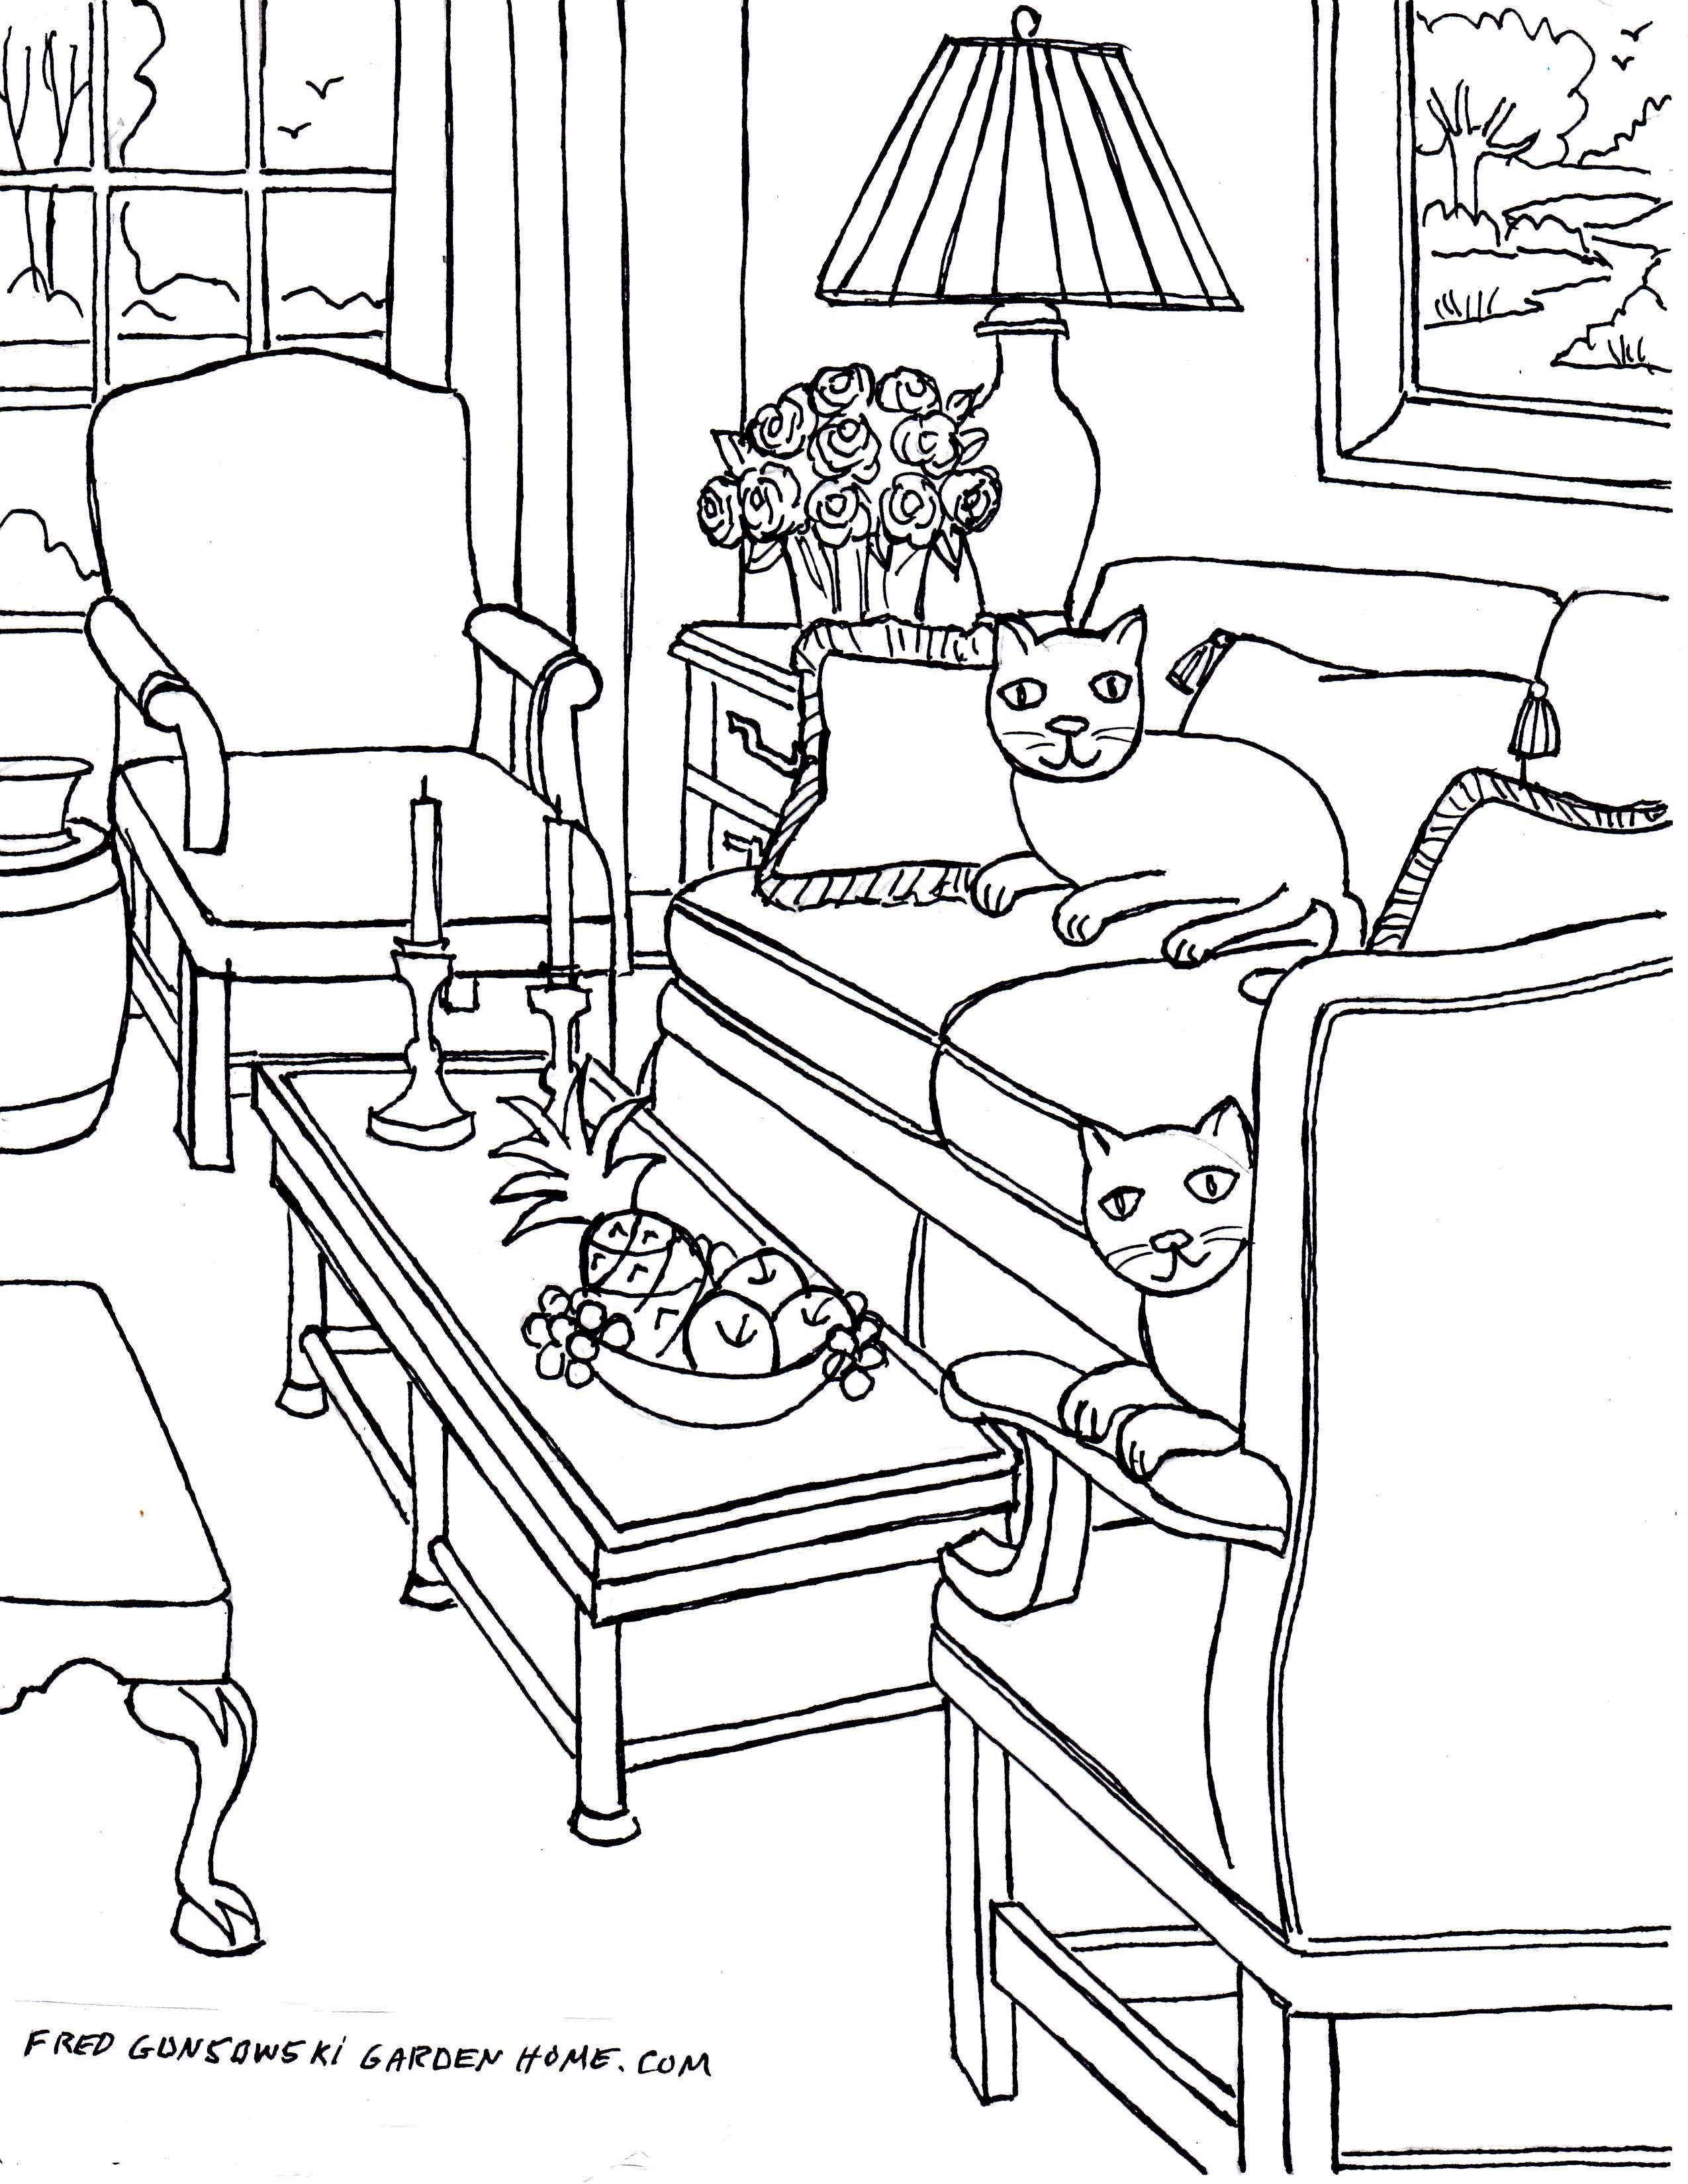 Living Room Coloring Pages - Coloring Home